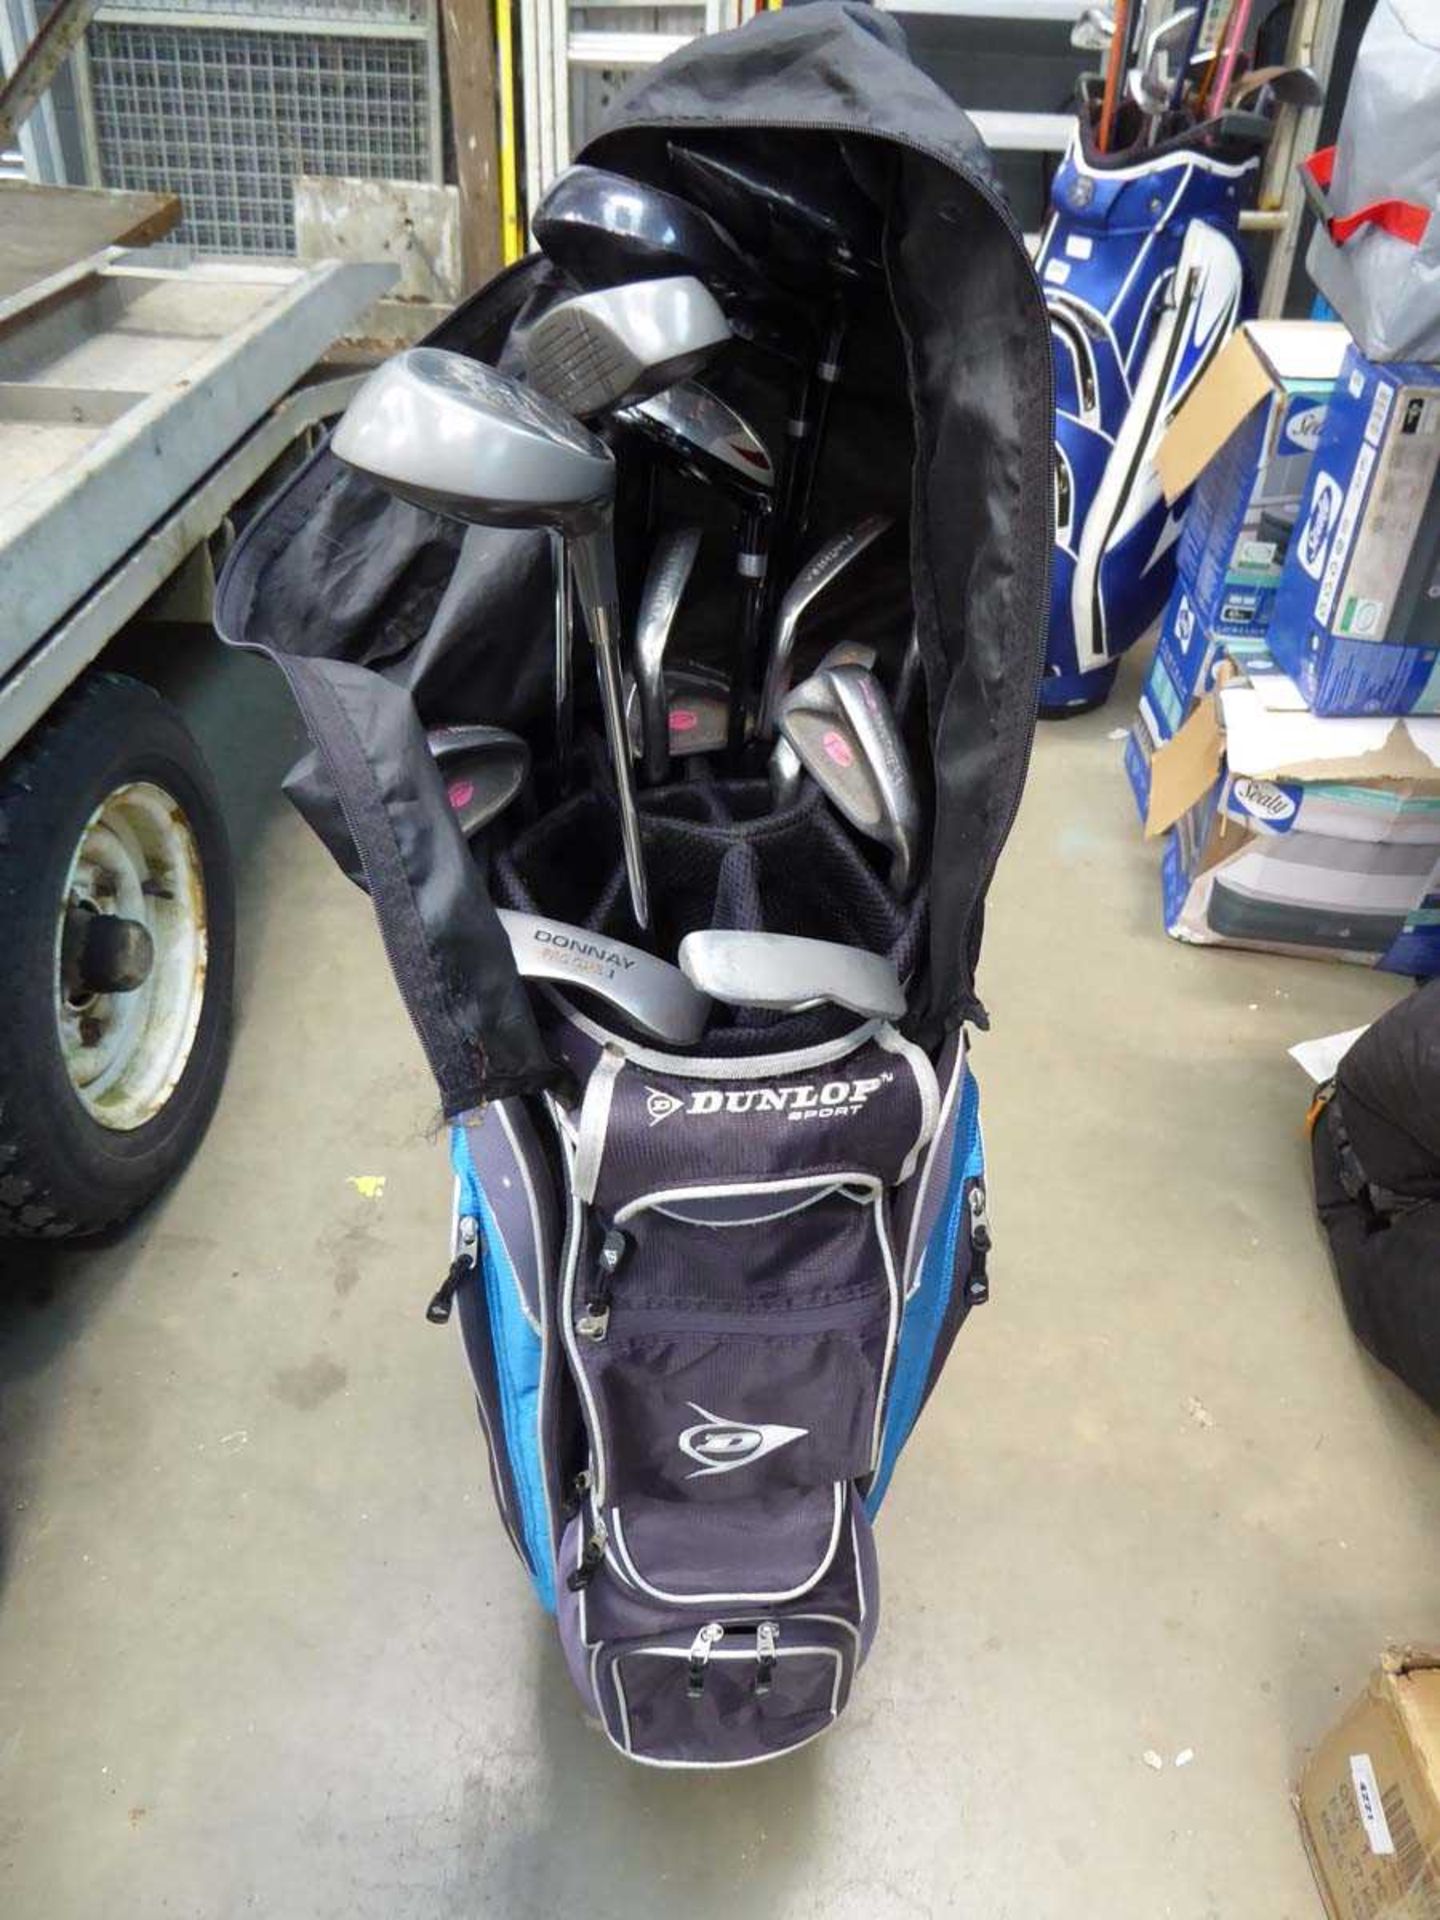 Blue and black Dunlop golf bag with assortment of clubs